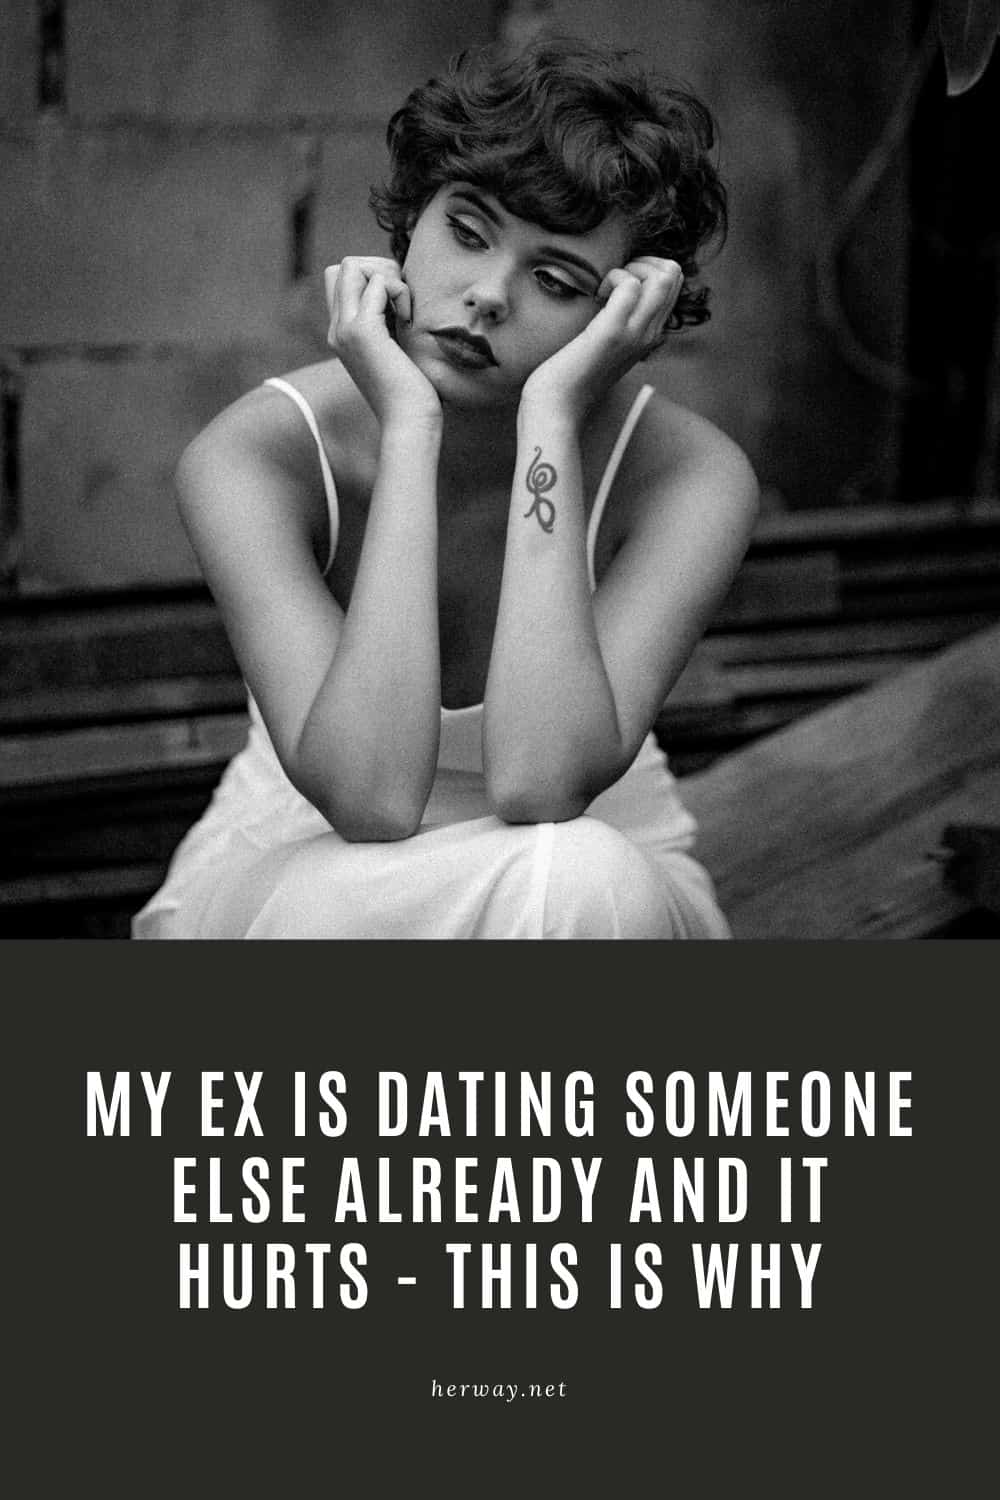 My Ex Is Dating Someone Else Already And It Hurts - This Is Why